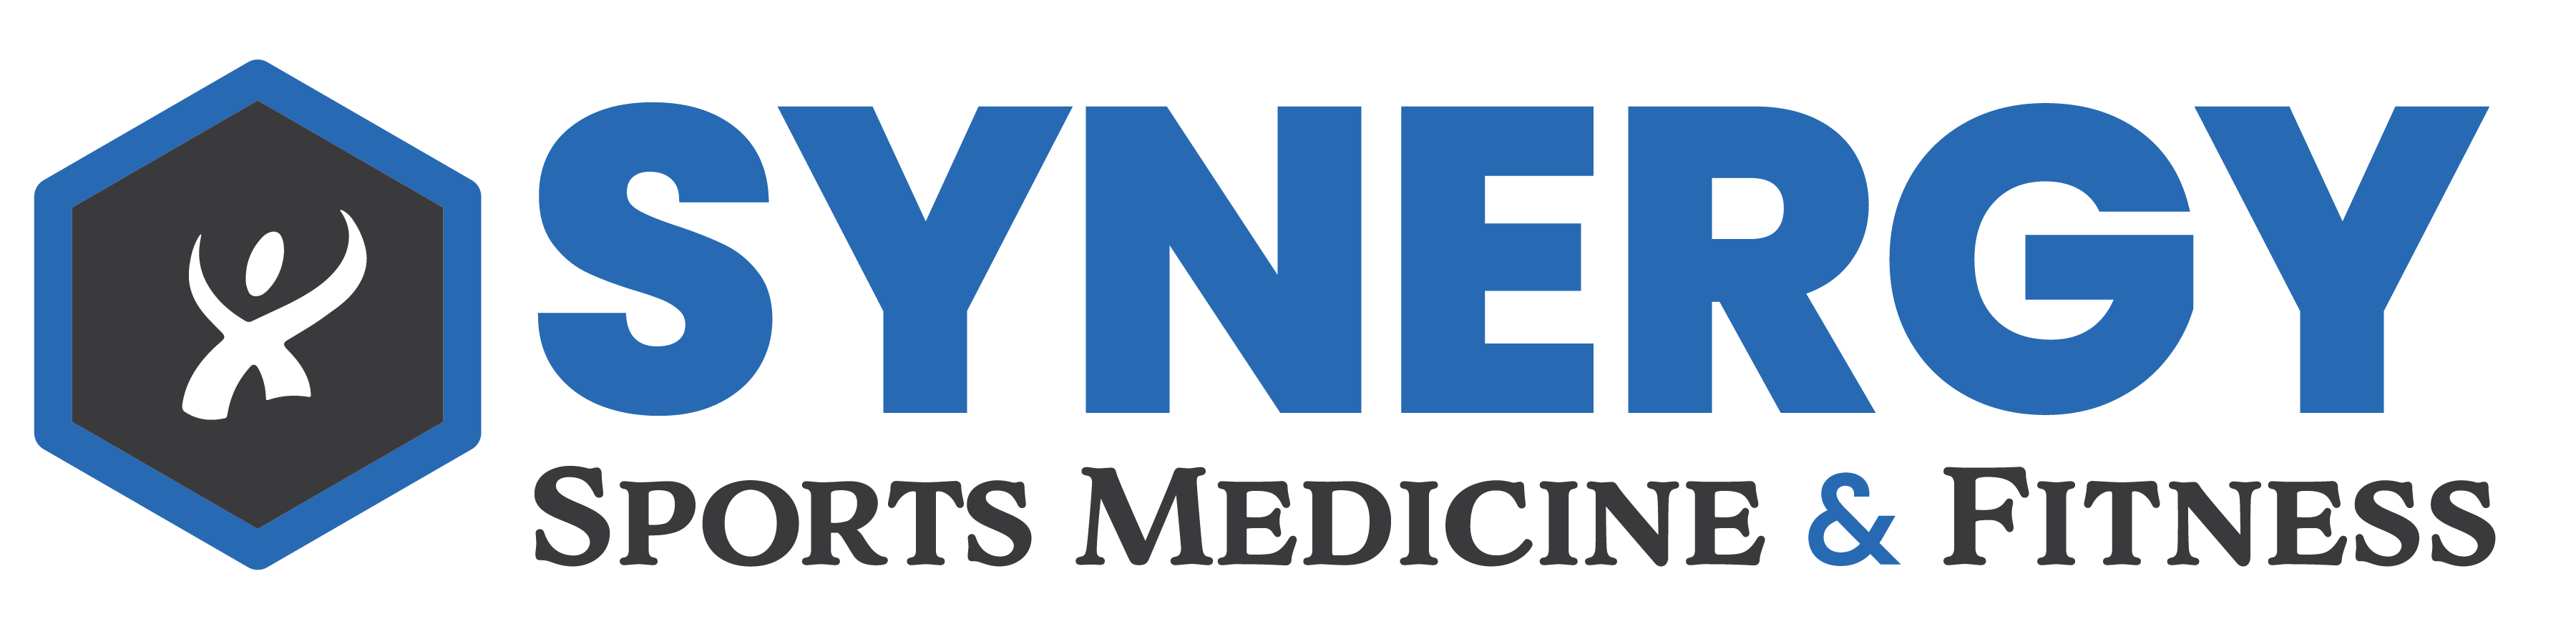 Synergy Sports Medicine & Fitness - Movement is Medicine